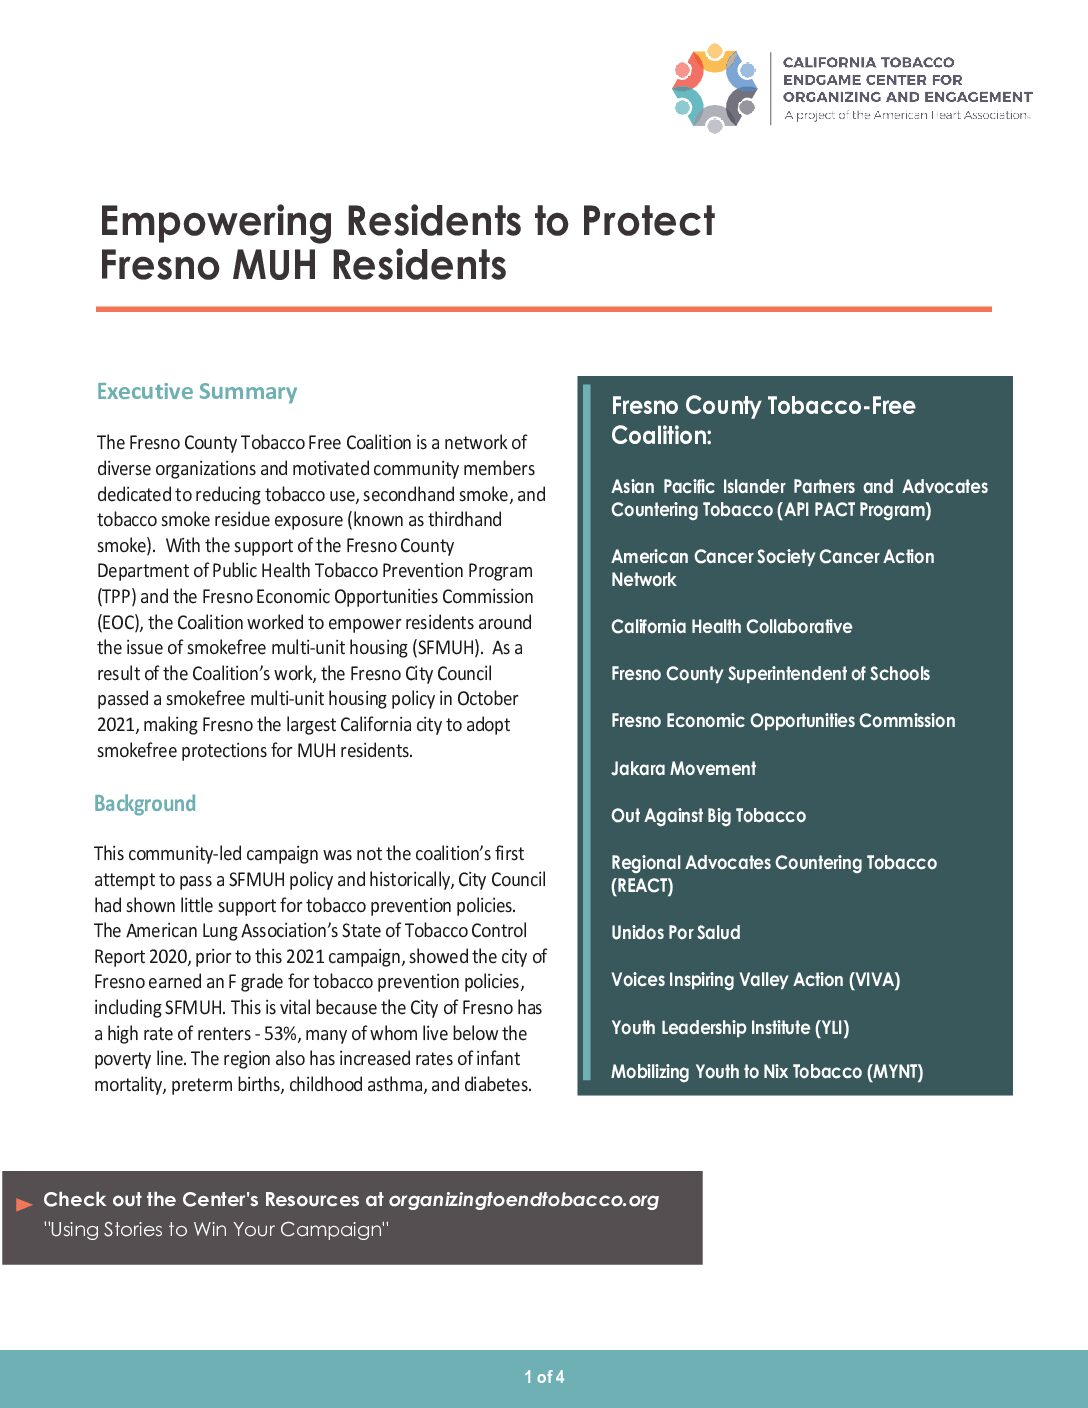 Fresno: Learn how this Coalition worked to empower residents around the issue of smokefree multi-unit housing. 